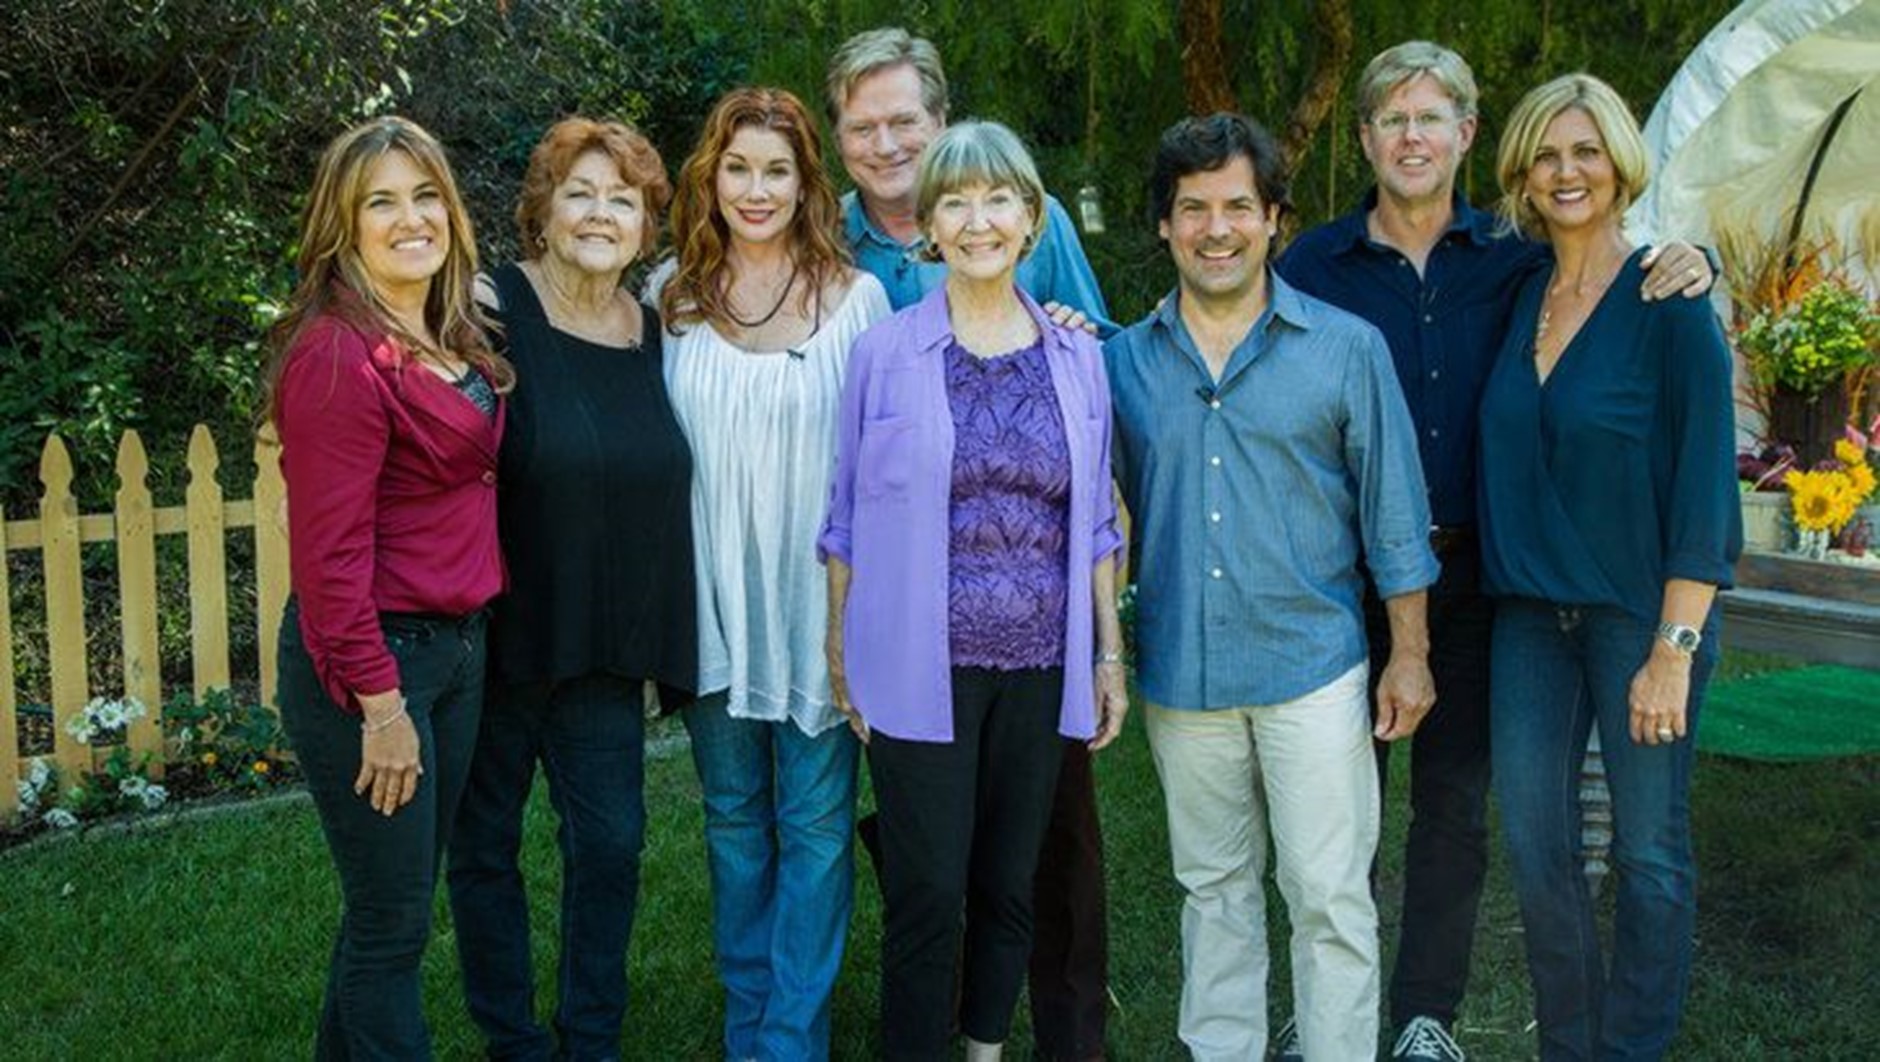 Little House on the Prairie cast reunion 2019: The actors get together.